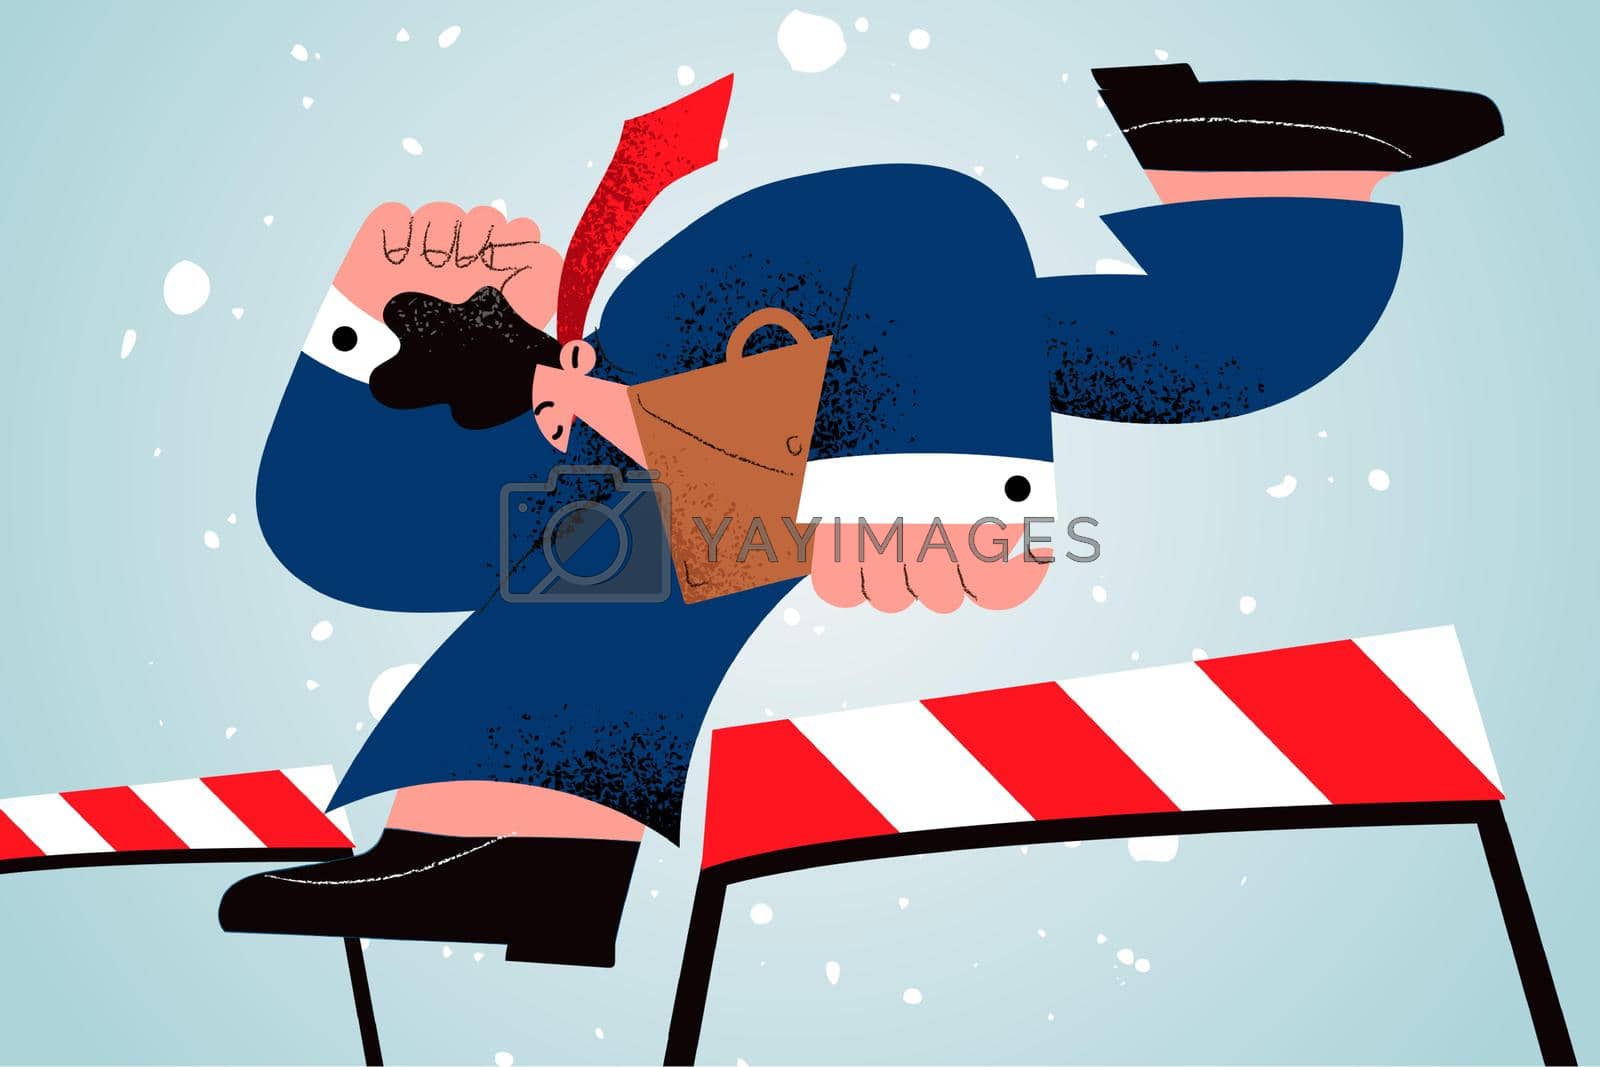 Overcoming problems and troubles concept. Young confident businessman jumping over obstacle with briefcase and documents in hand vector illustration